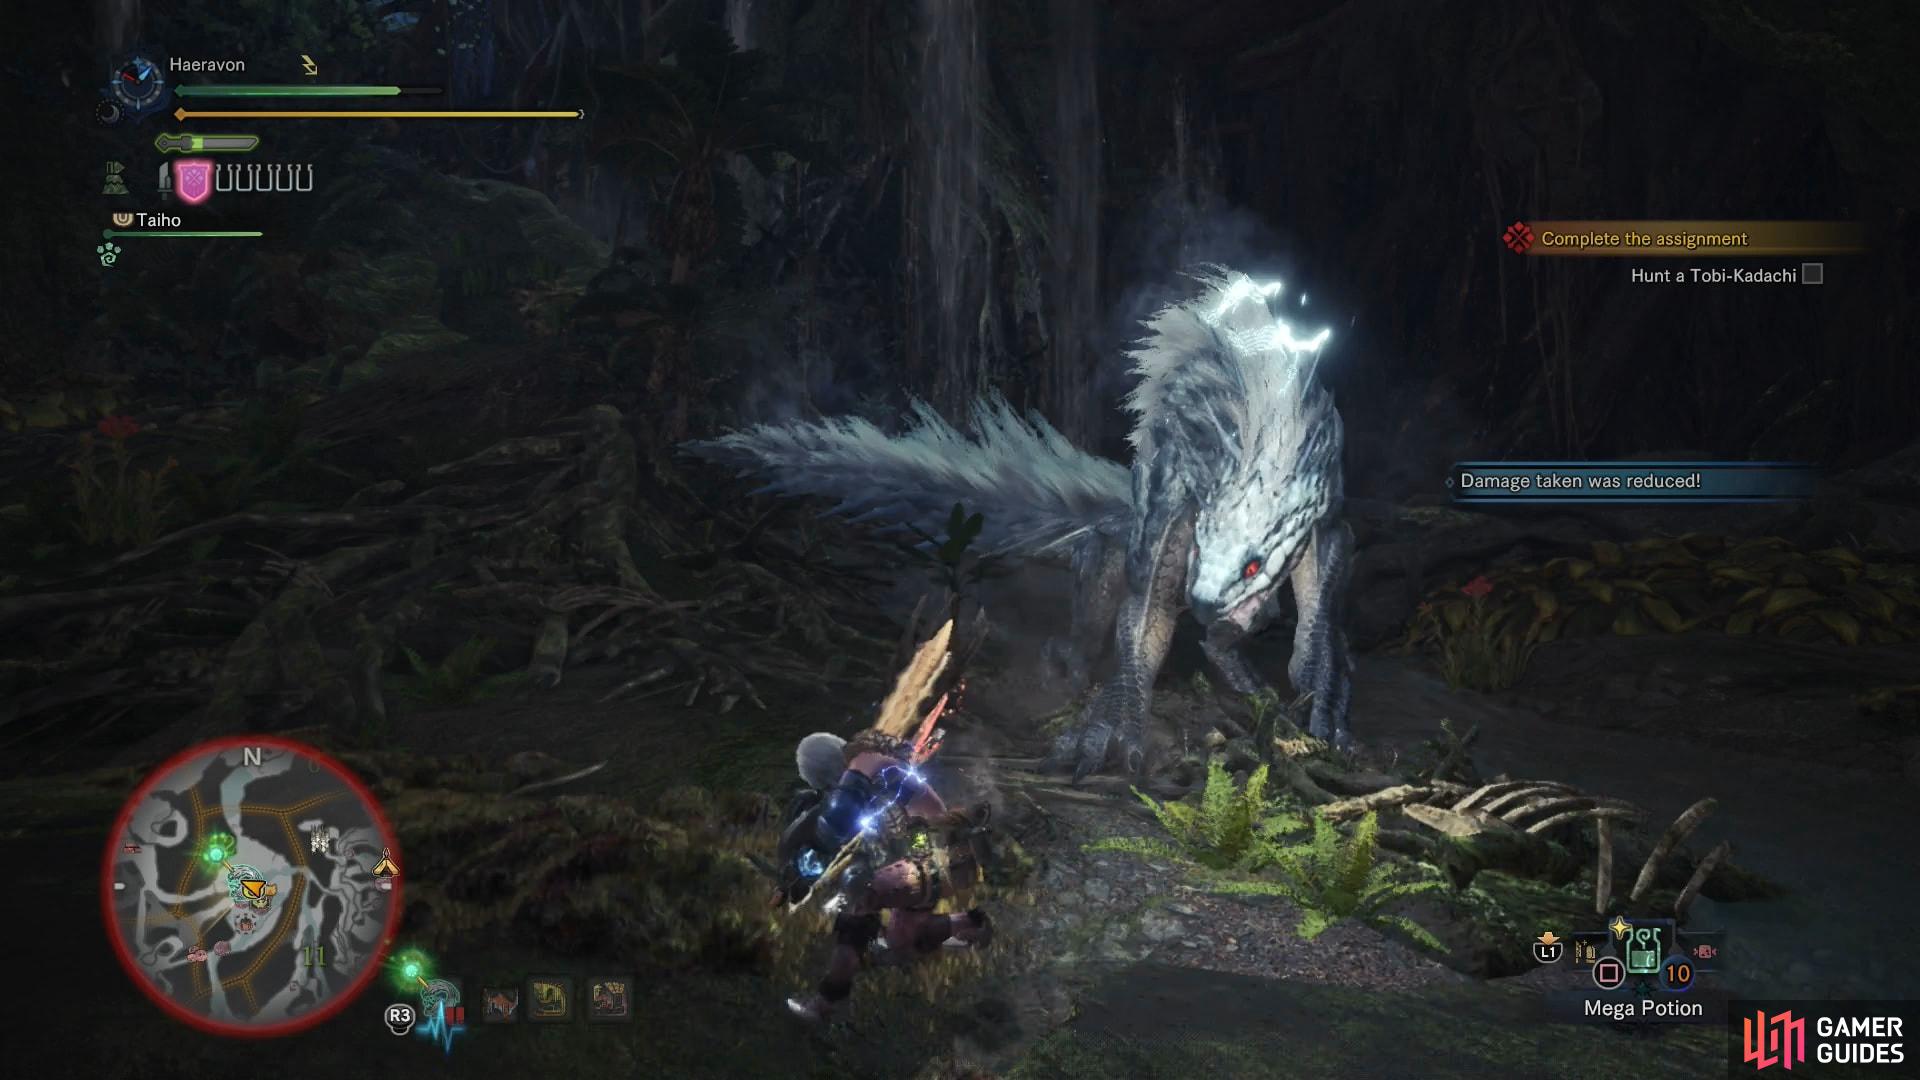 When enraged, the Tobi-Kadachi will charge itself up